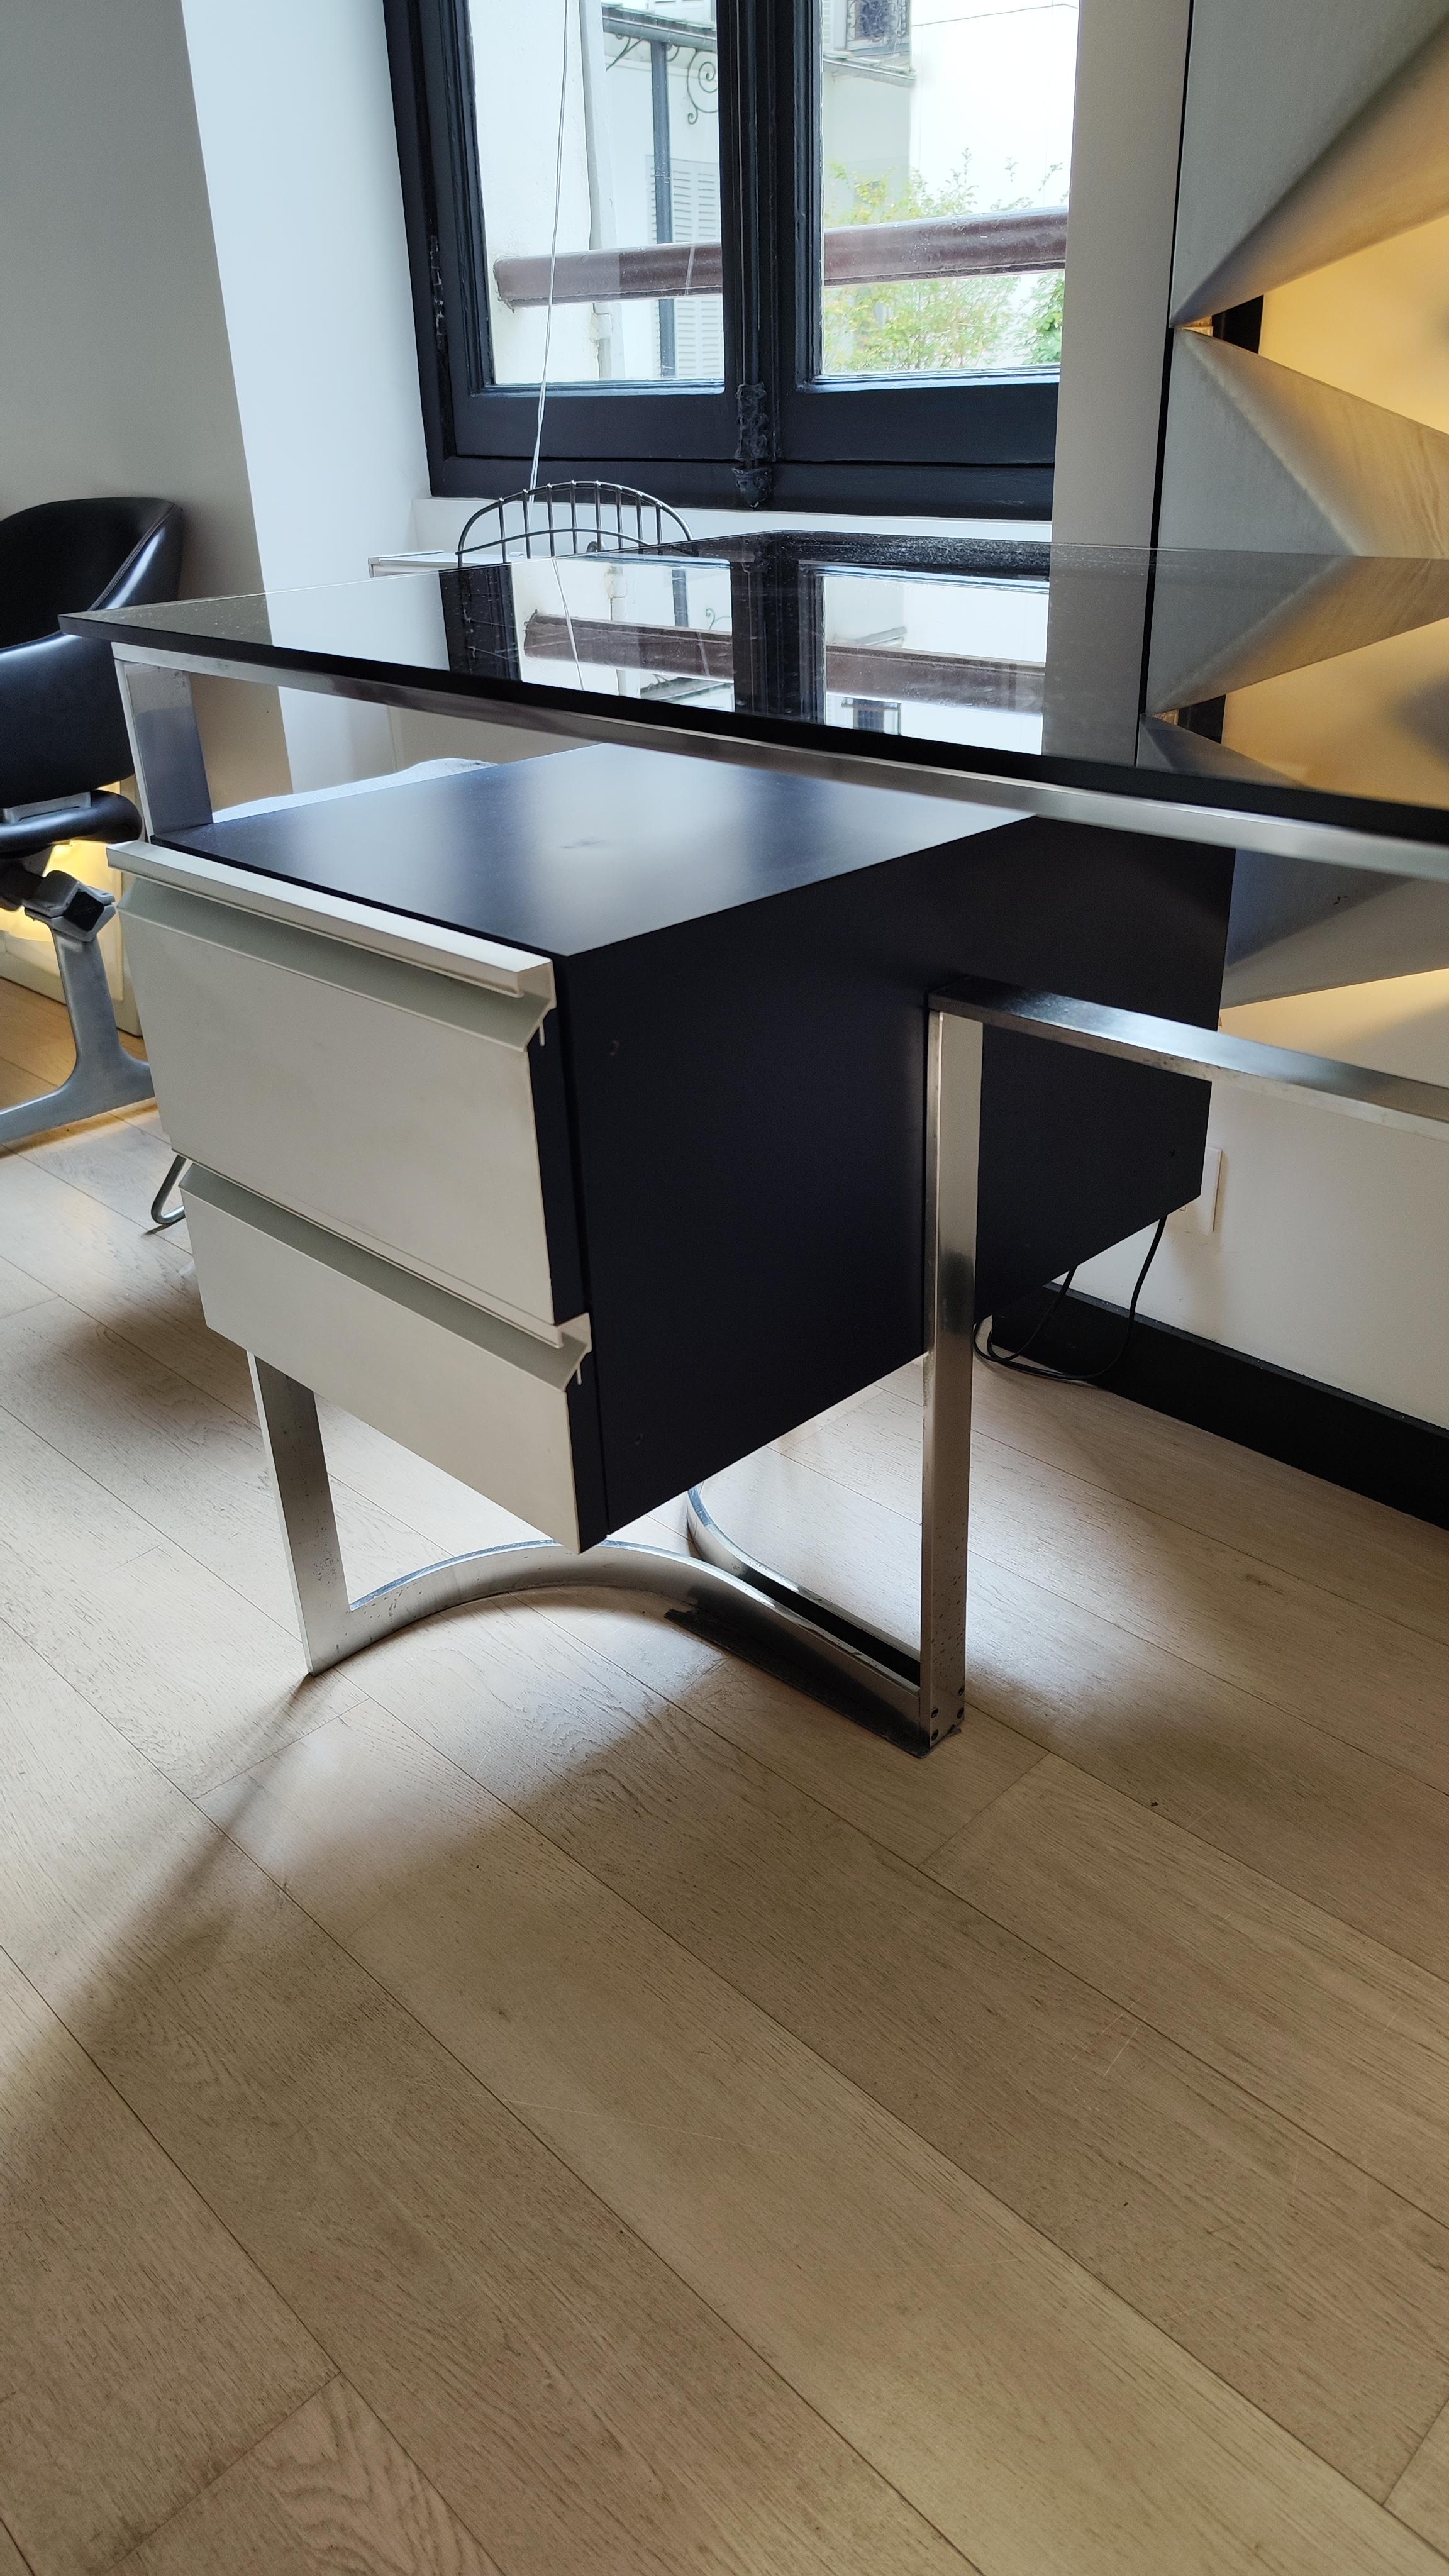 Patrice Maffei Desk for Kappa, 70s, Brushed Stainless Steel, Smoked Glass, 1970 For Sale 11